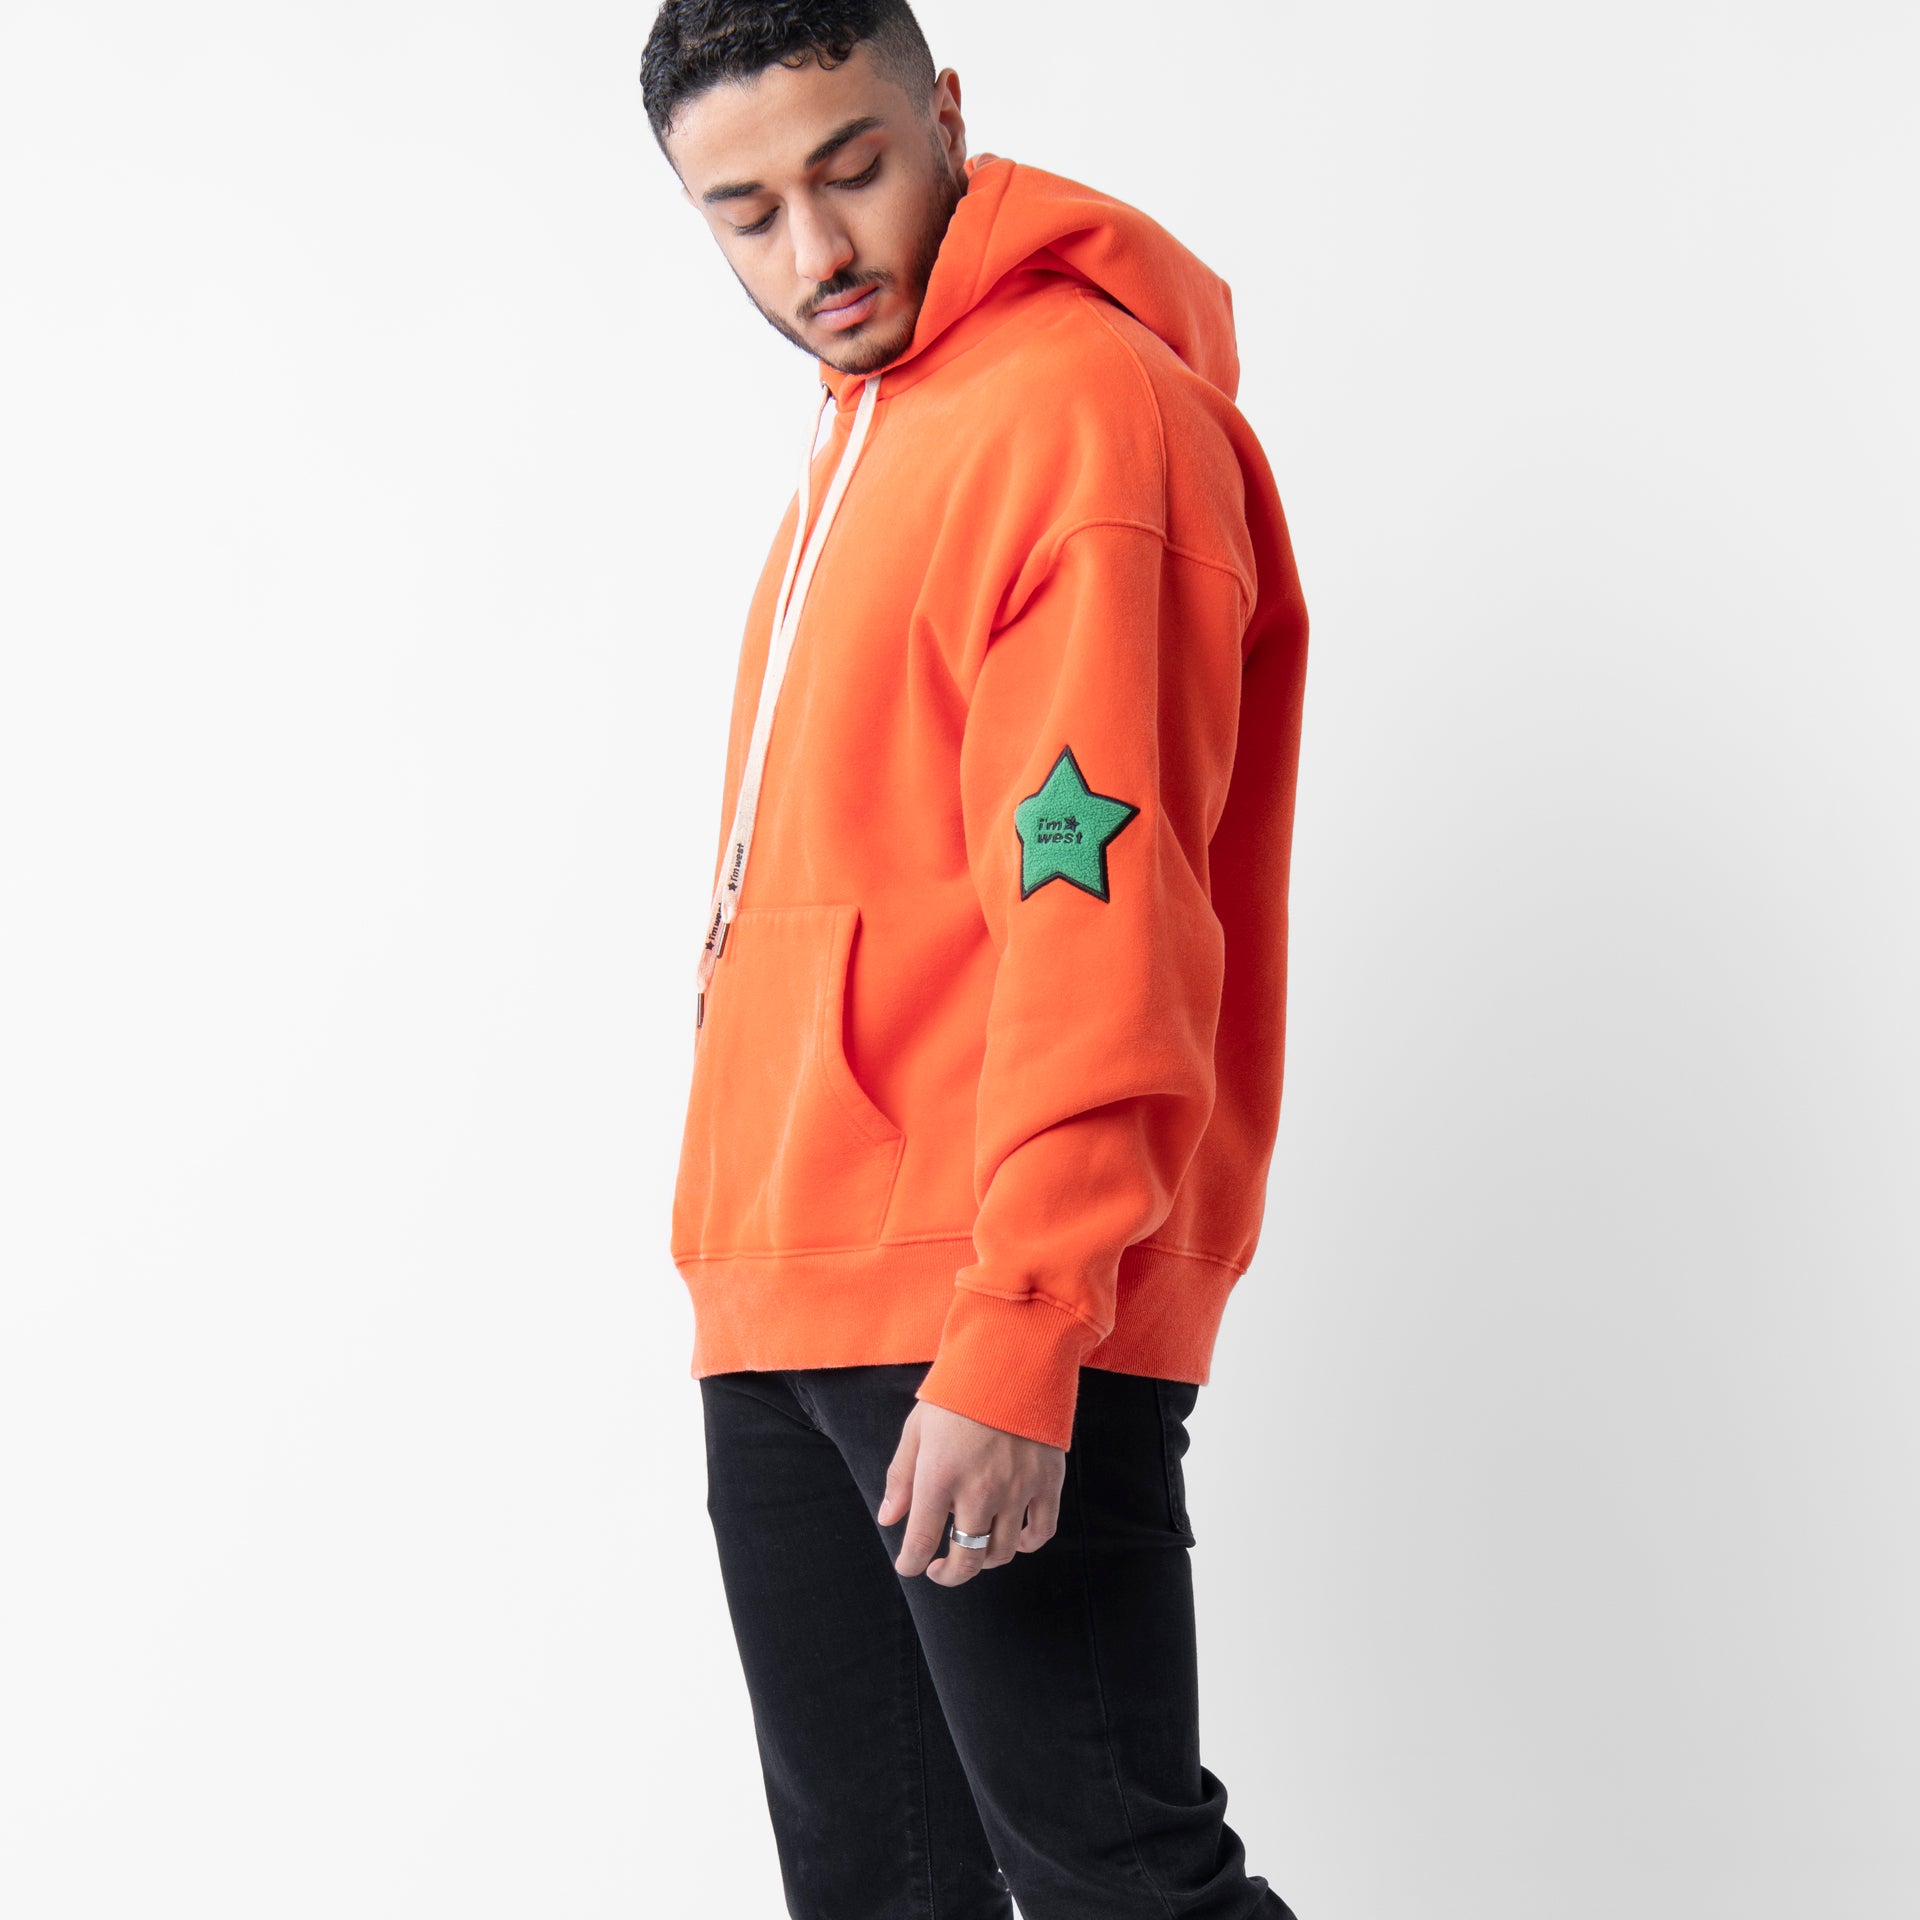 Orange Classic Hoodie From I'm West